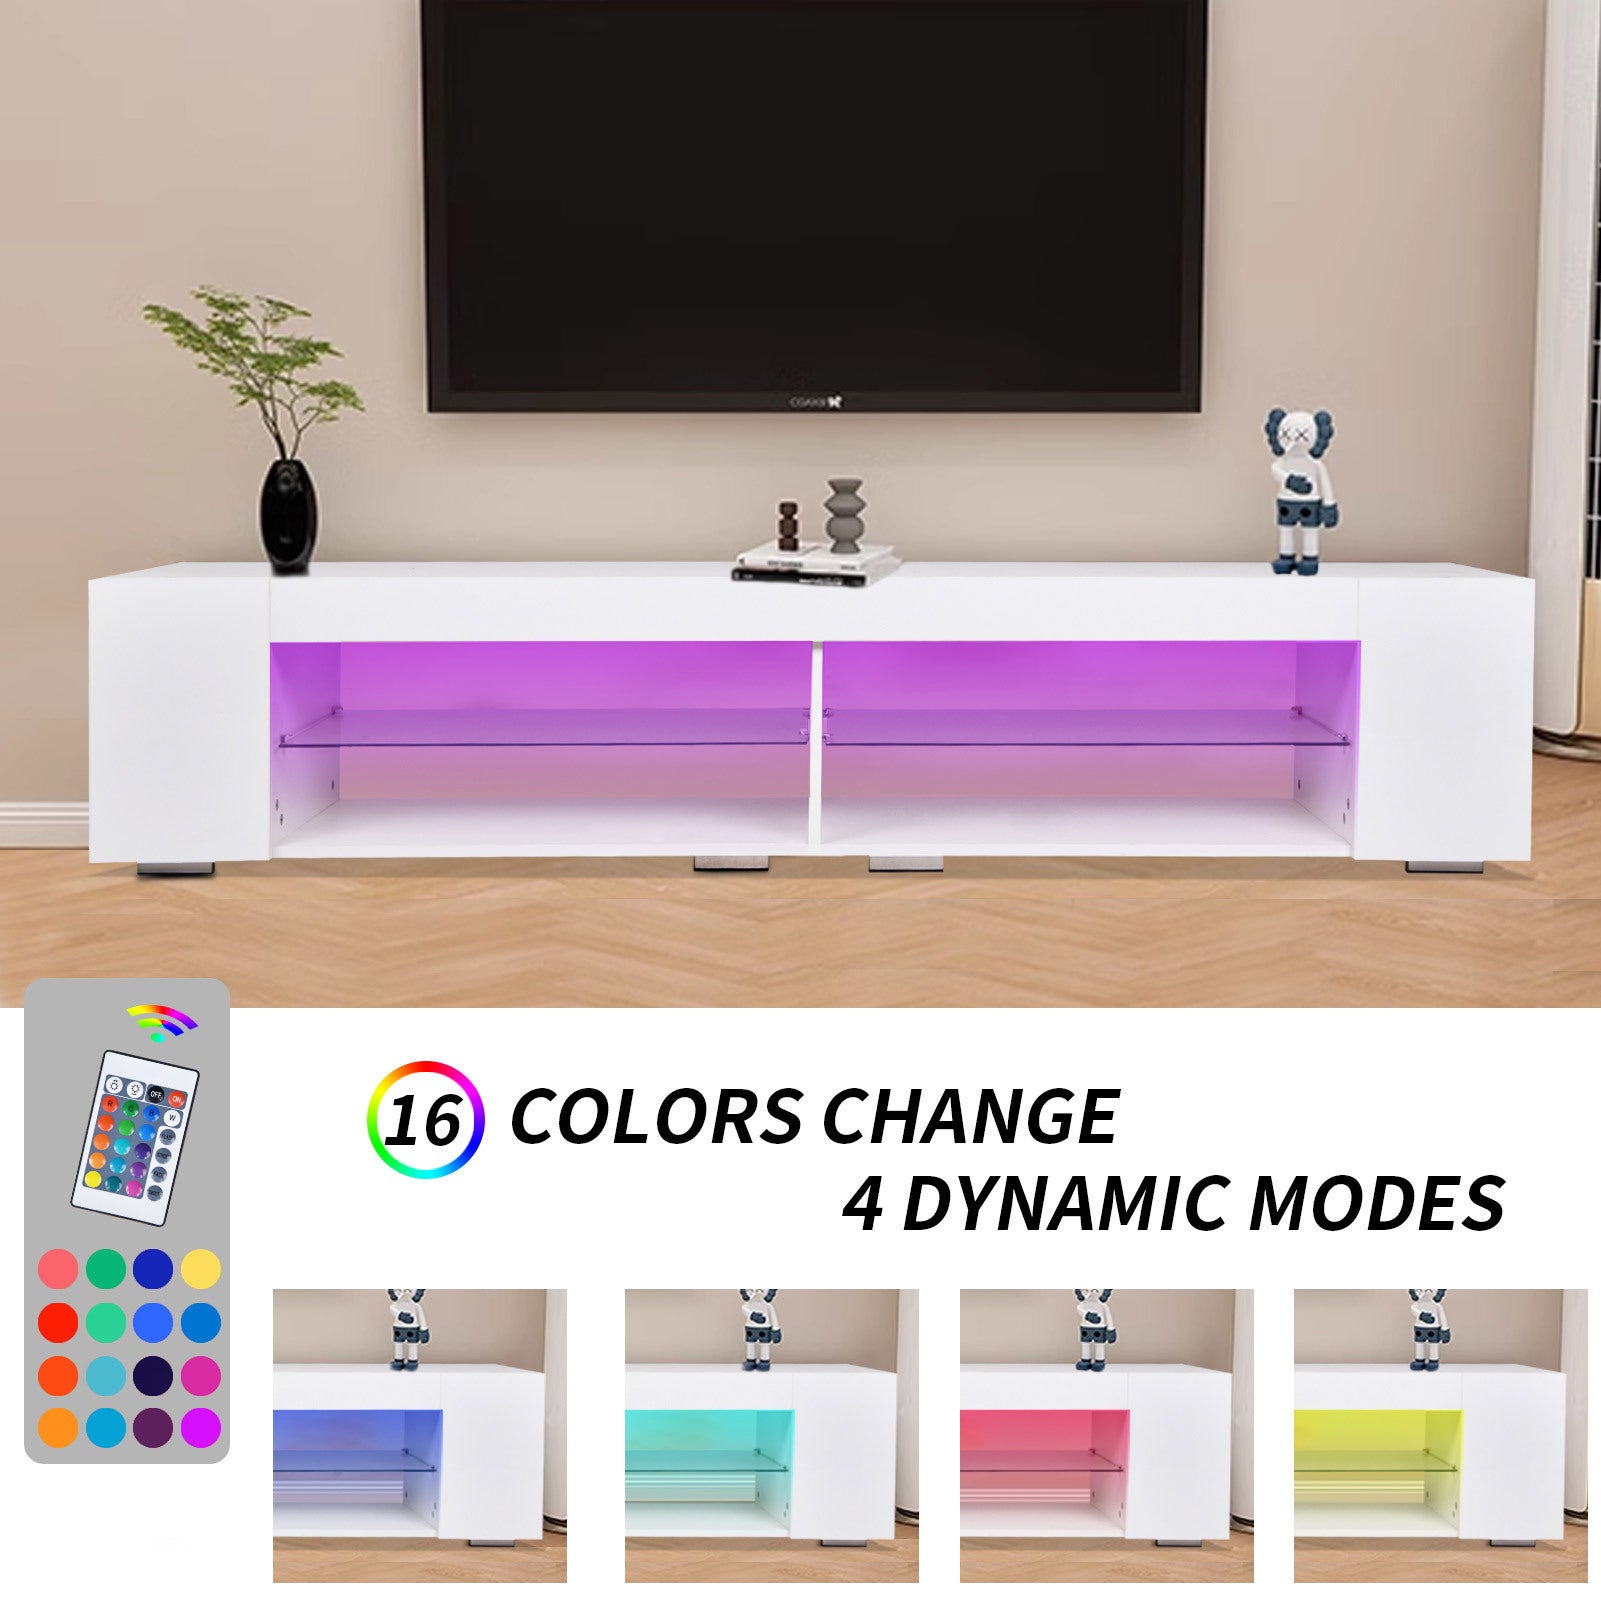 LED TV Stand Modern Entertainment Center with Storage High Gloss Gaming Living Room Bedroom TV cabinet - Enova Luxe Home Store